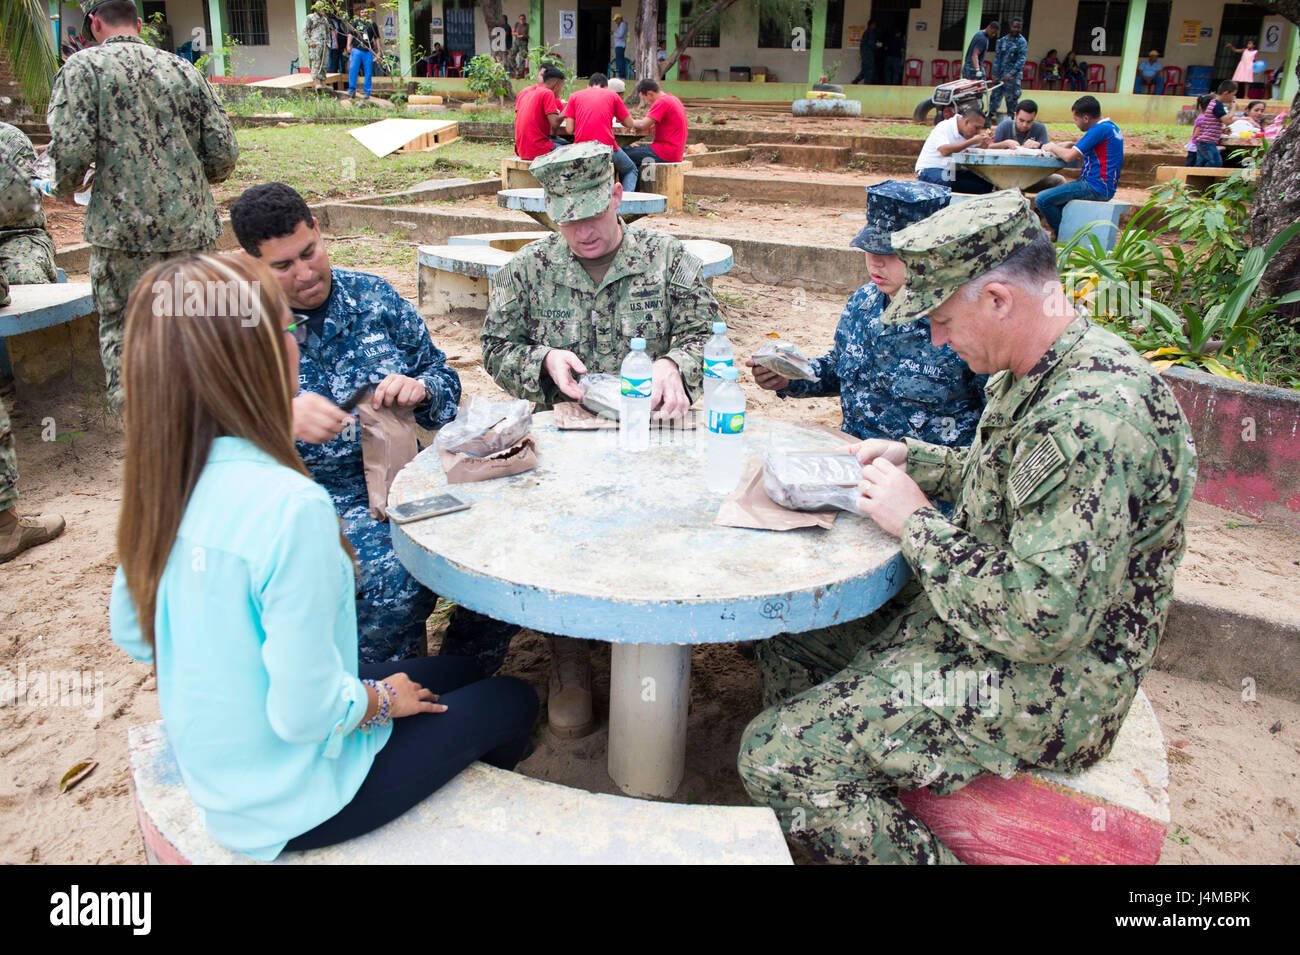 170223-N-YL073-483 TRUJILLO, Honduras (Feb. 23, 2017) – Rear Adm. Sean S. Buck, Commander U.S. Naval Forces Southern Command/U.S. 4th Fleet (USNAVSO/FOURTHFLT), eats lunch with Sailors and the acting governor of Colon, Honduras during a tour of the Continuing Promise 2017 (CP-17) medical site in support of the mission's visit to Trujillo, Honduras. CP-17 is a U.S. Southern Command-sponsored and U.S. Naval Forces Southern Command/U.S. 4th Fleet-conducted deployment to conduct civil-military operations including humanitarian assistance, training engagements, and medical, dental, and veterinary s Stock Photo